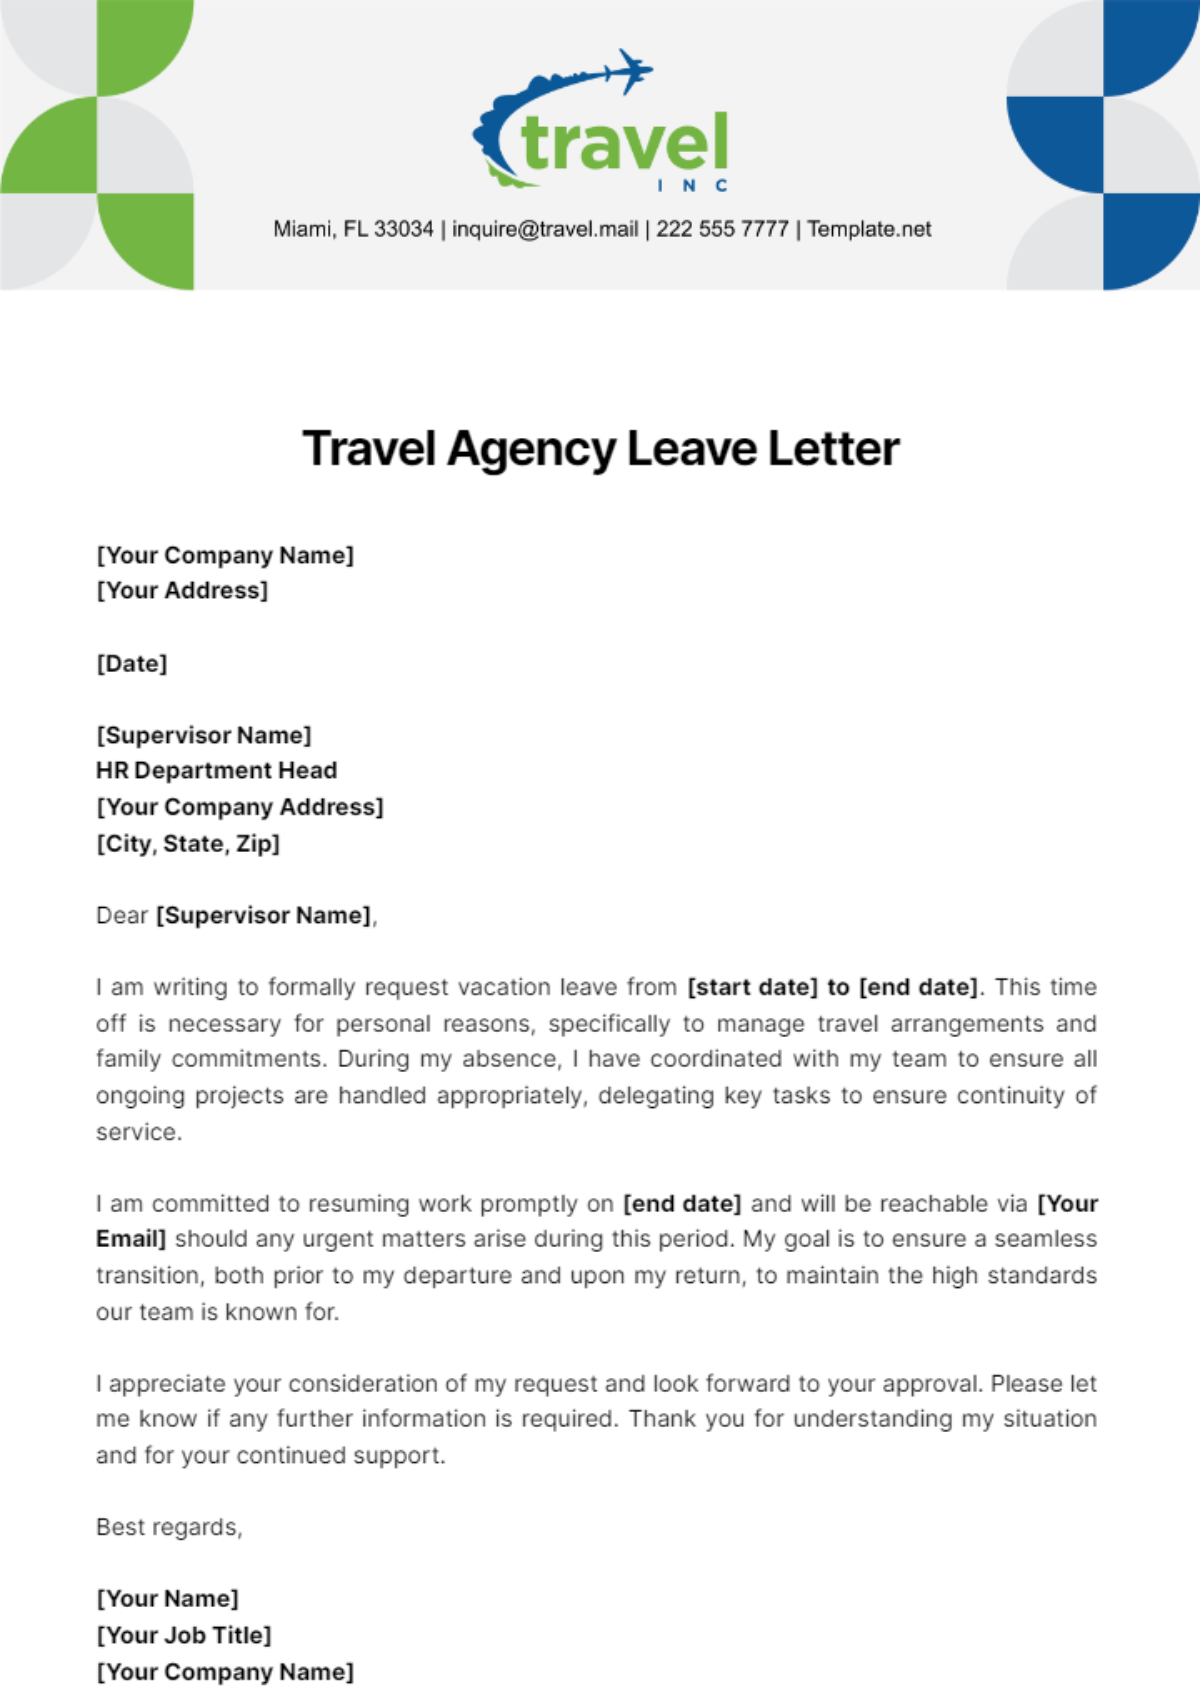 Free Travel Agency Leave Letter Template